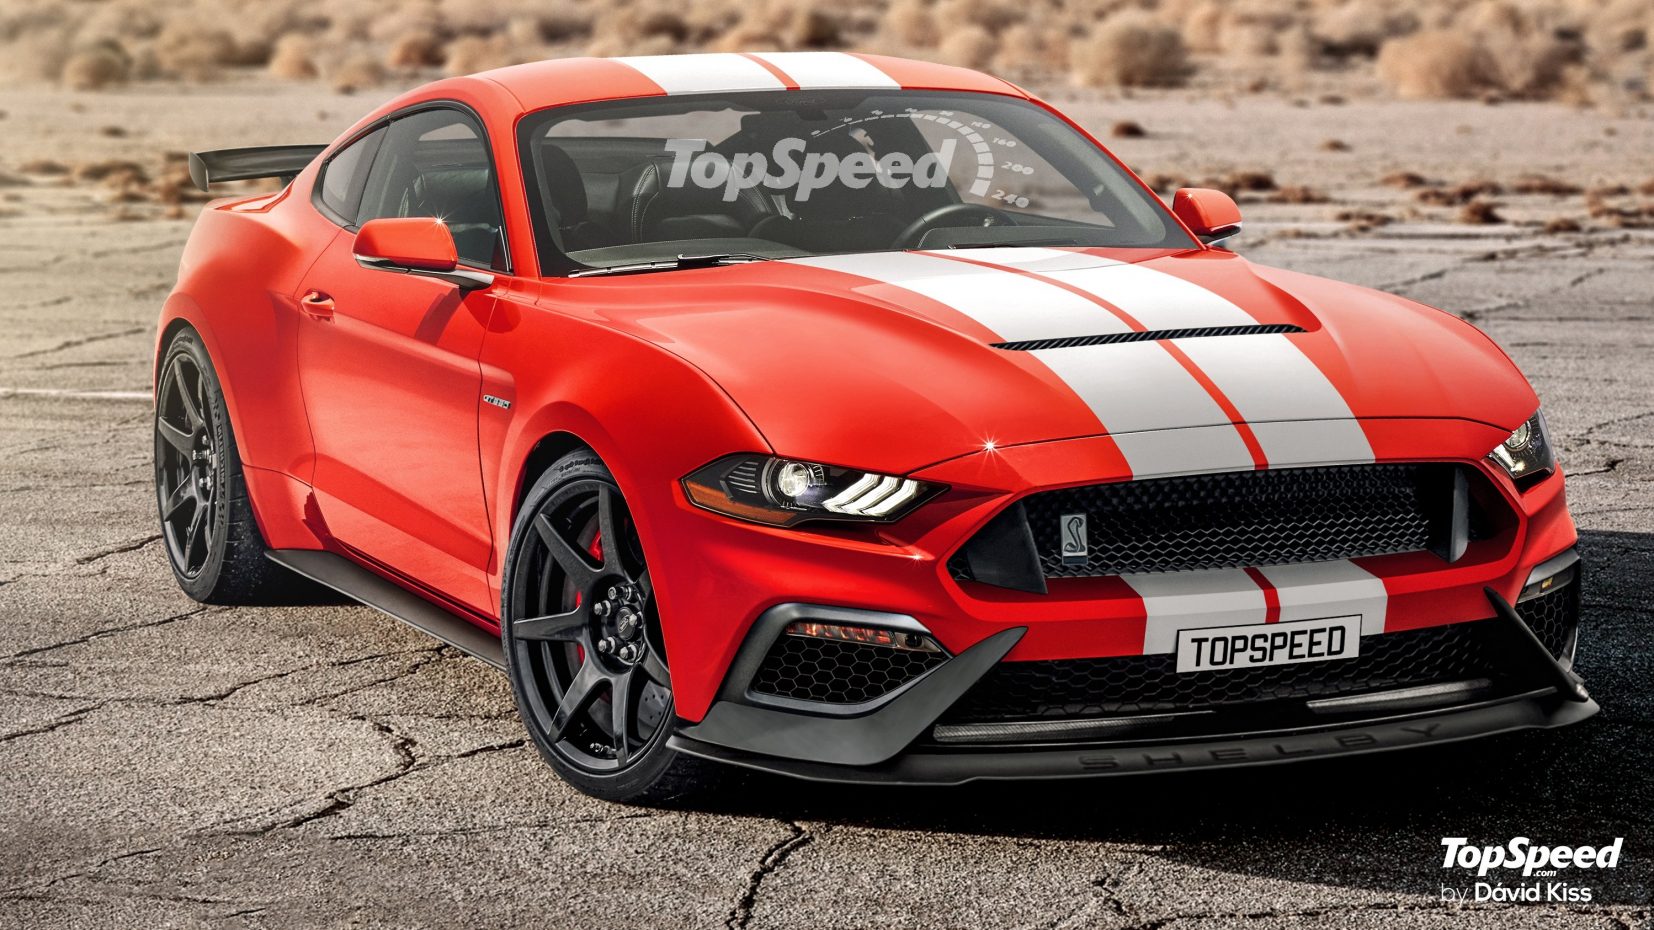 2019 Ford Mustang Gt Top Hd Wallpapers - Shelby Gt500 2019 Mustang - HD Wallpaper 